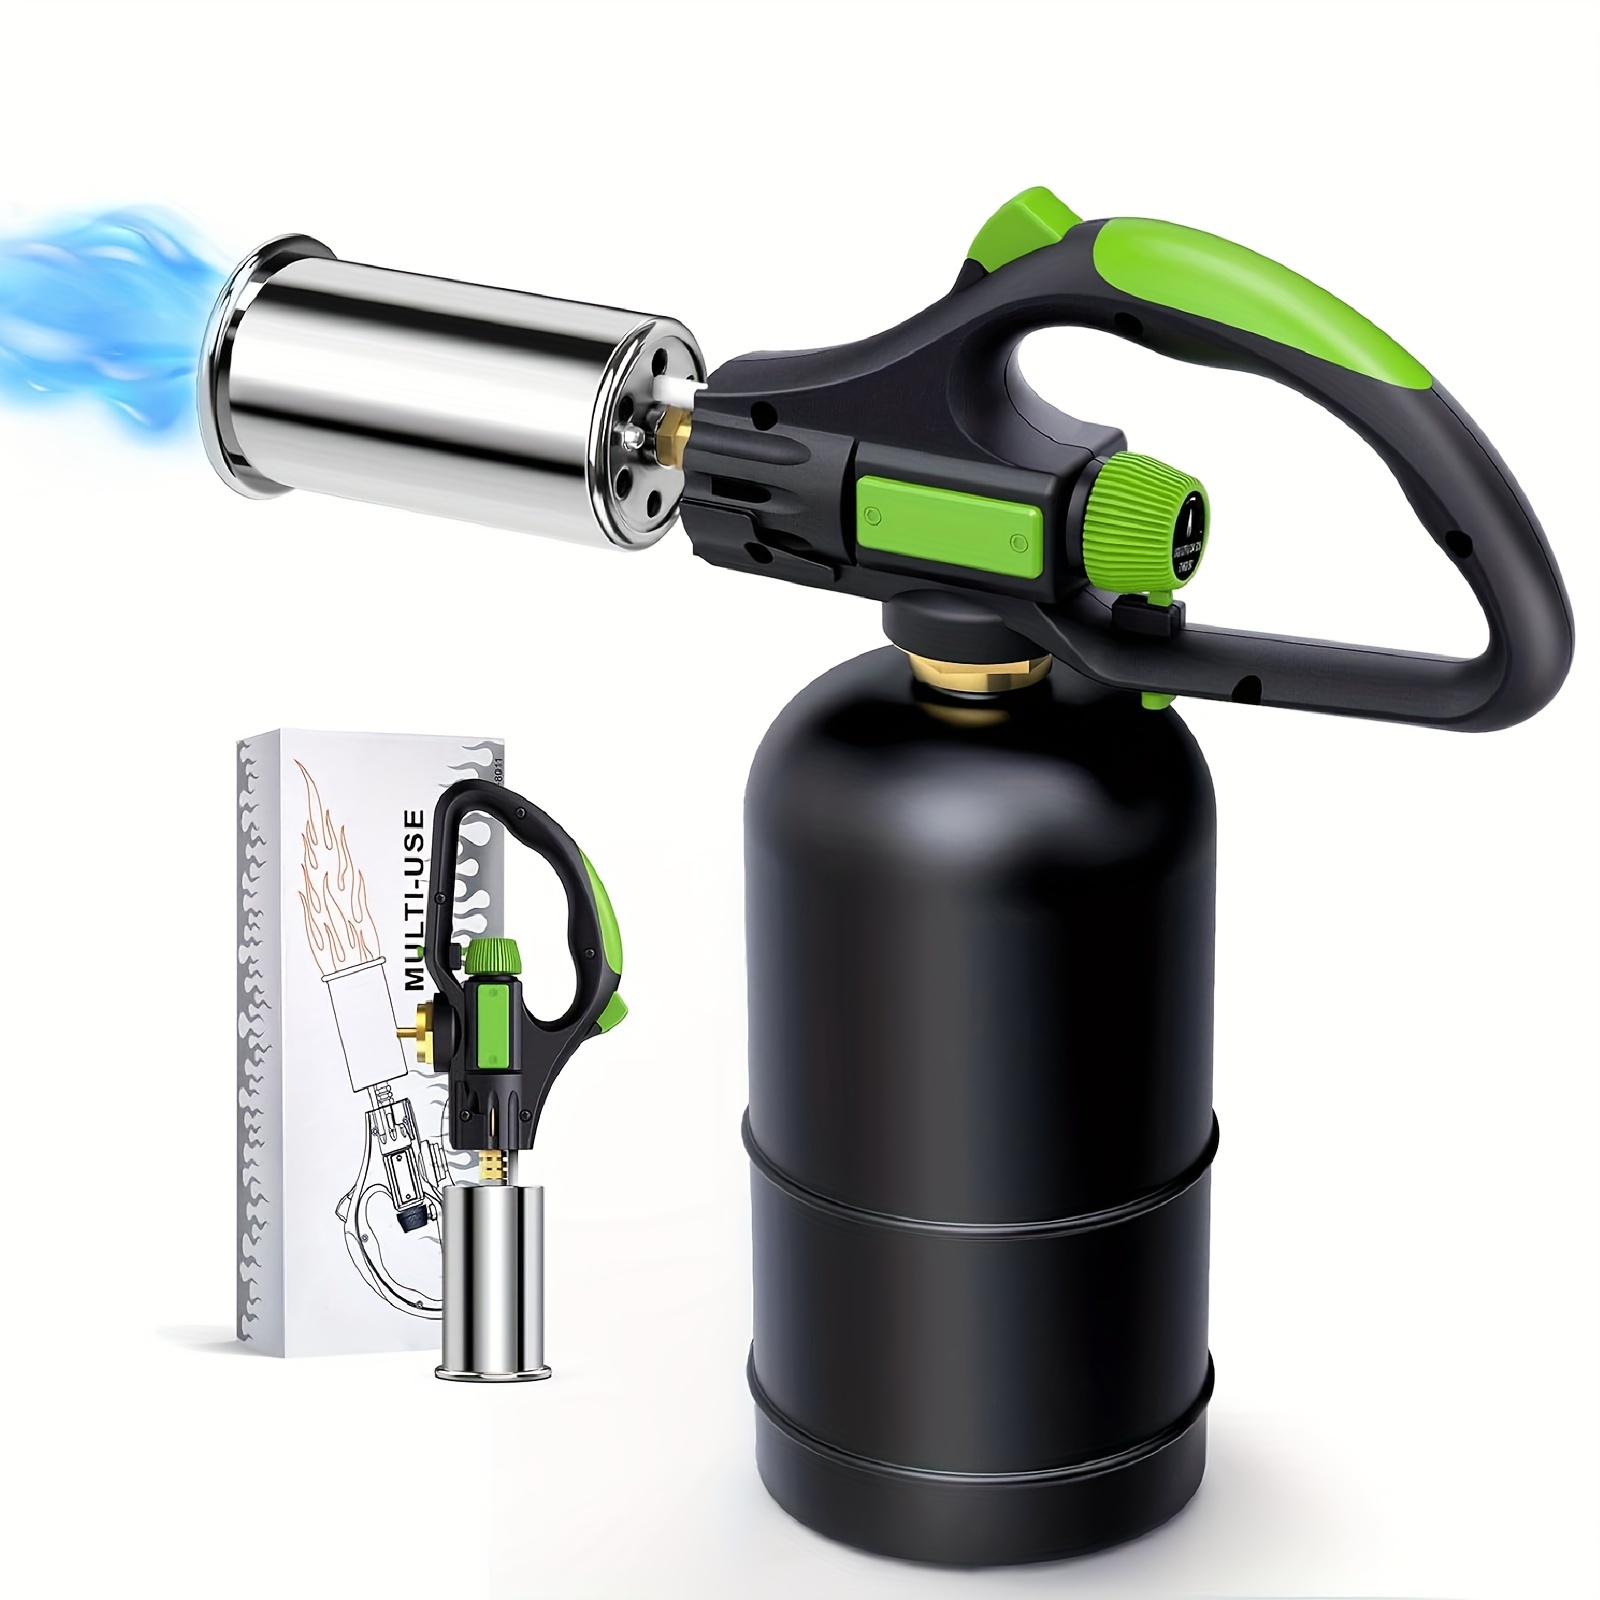 

Powerful Grill Cooking Torch, Propane Kitchen Torch, Charcoal Sous Vide Torch Lighter For Searing Steak Bbq Cooking&creme Brulee - Unique Labor-saving Design With Adjustable Flame (tank Not Included)